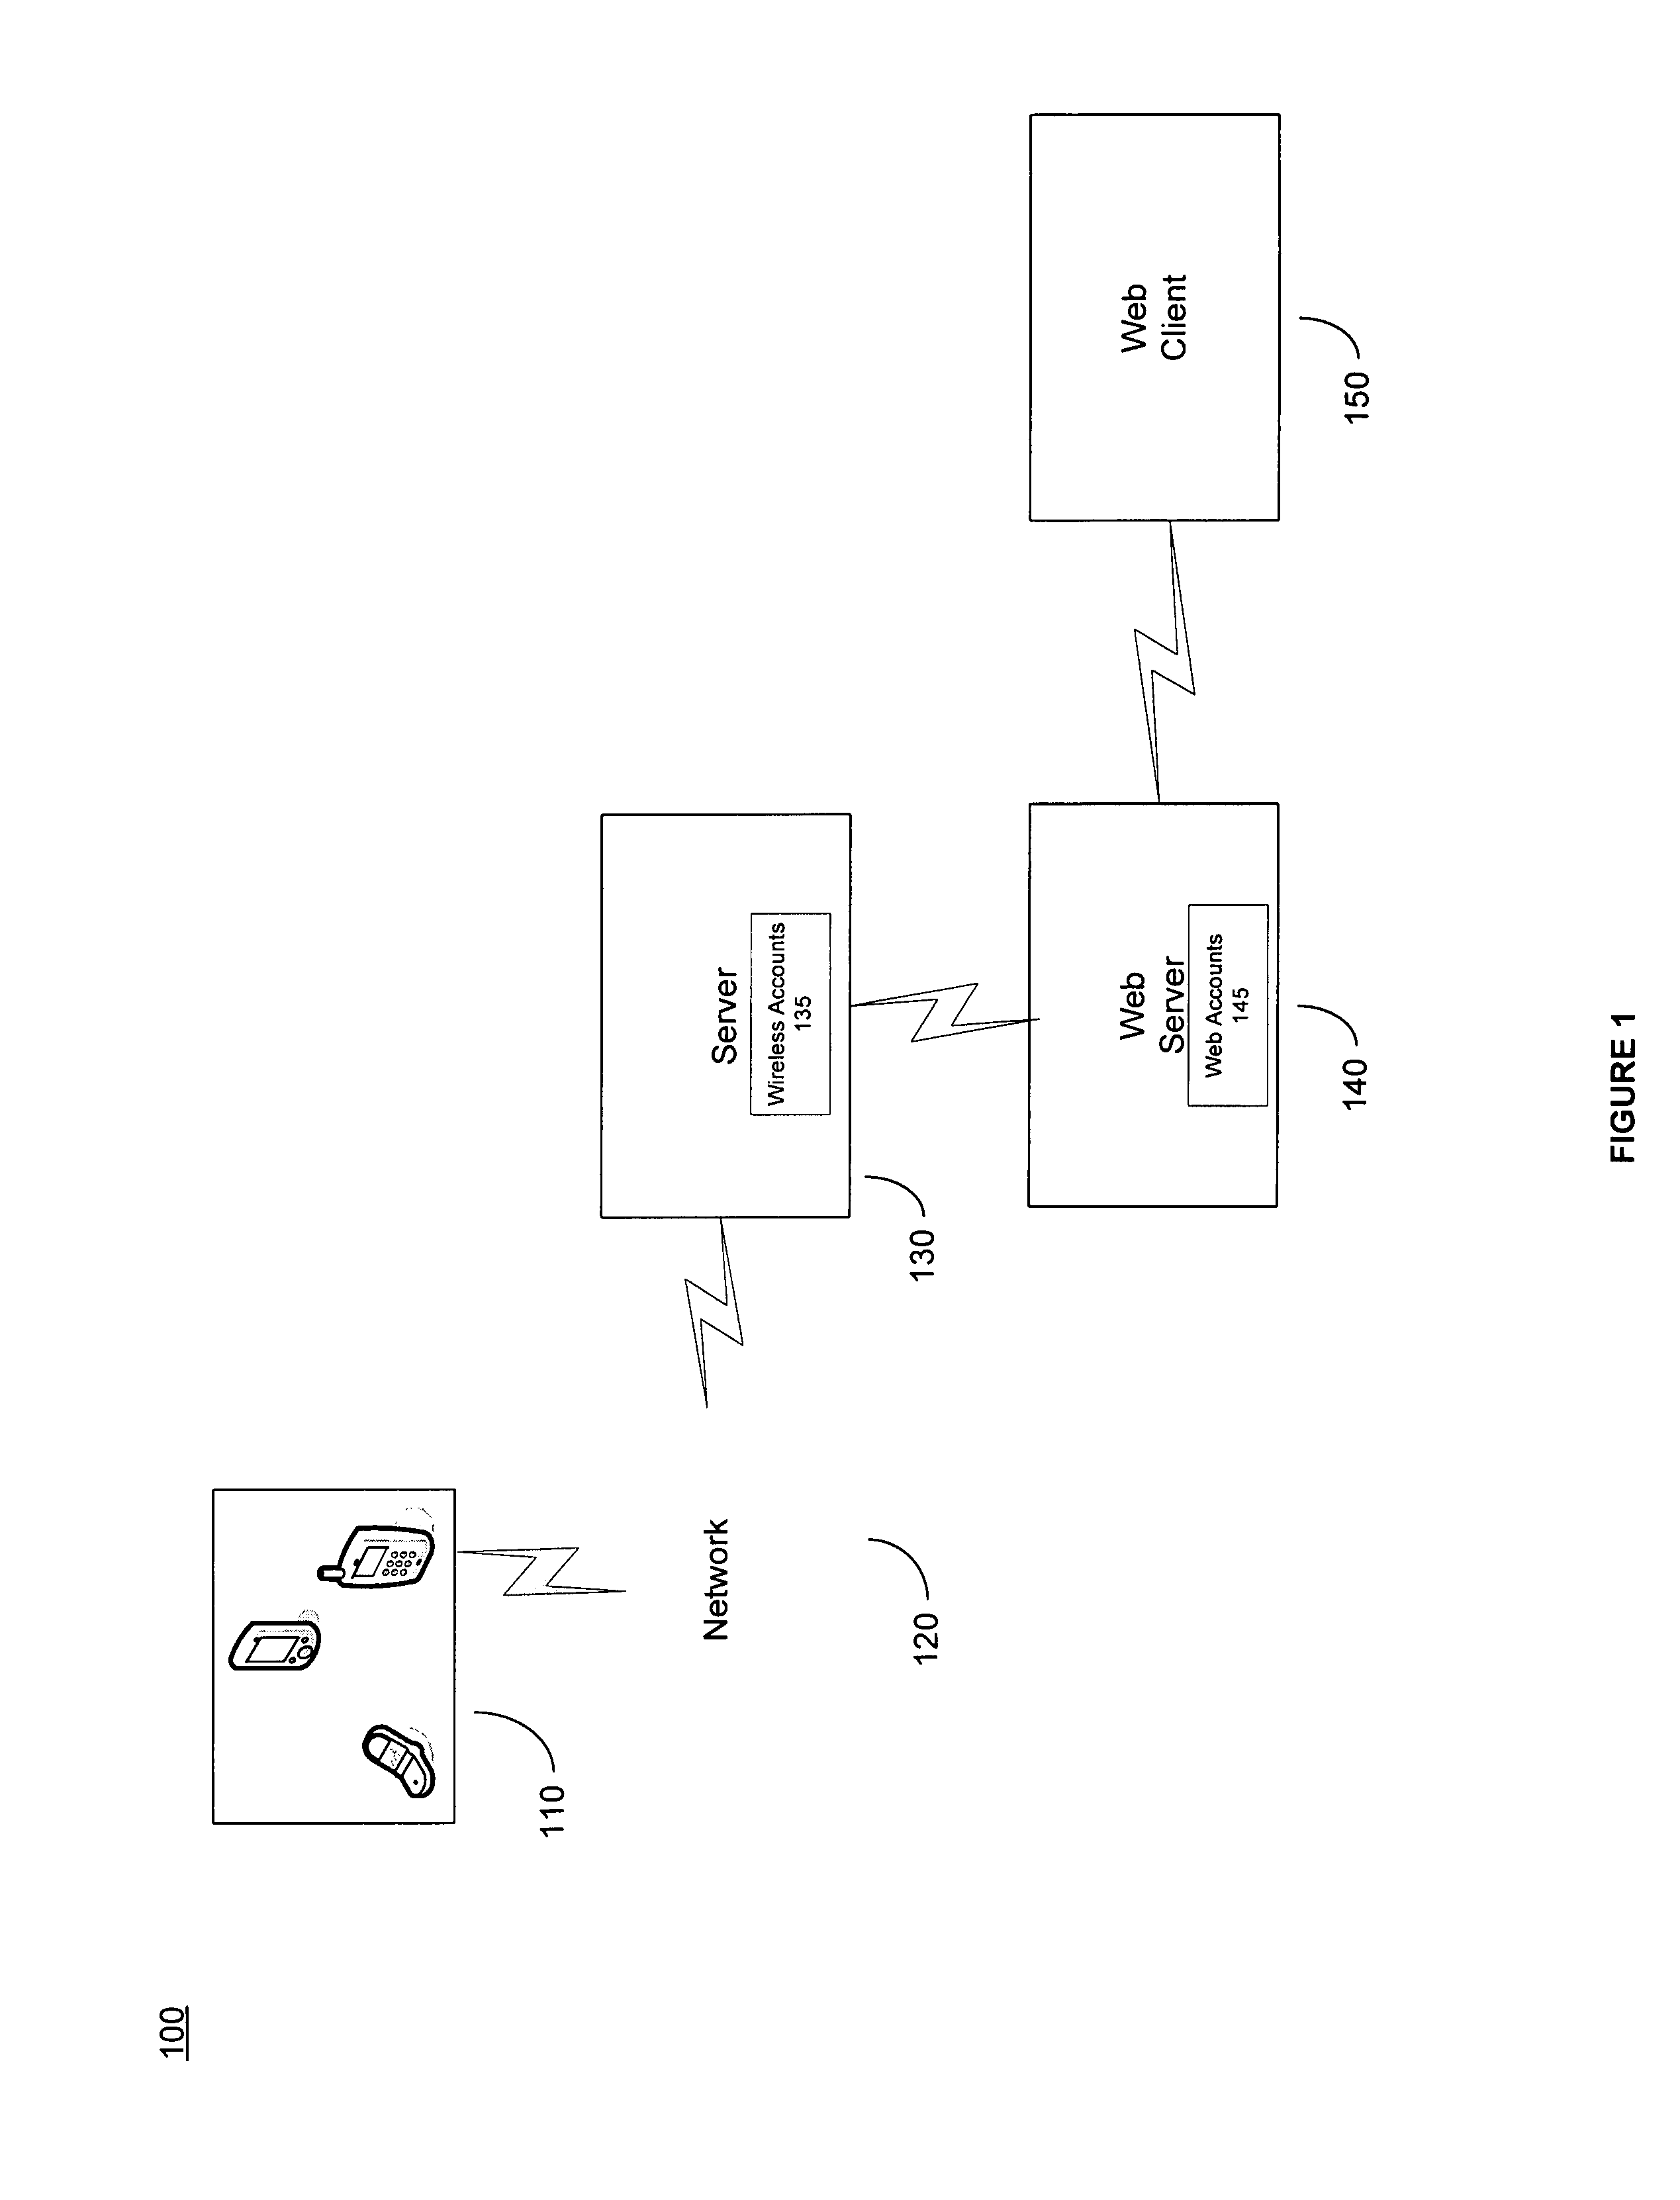 Method and system for accessing wireless account information